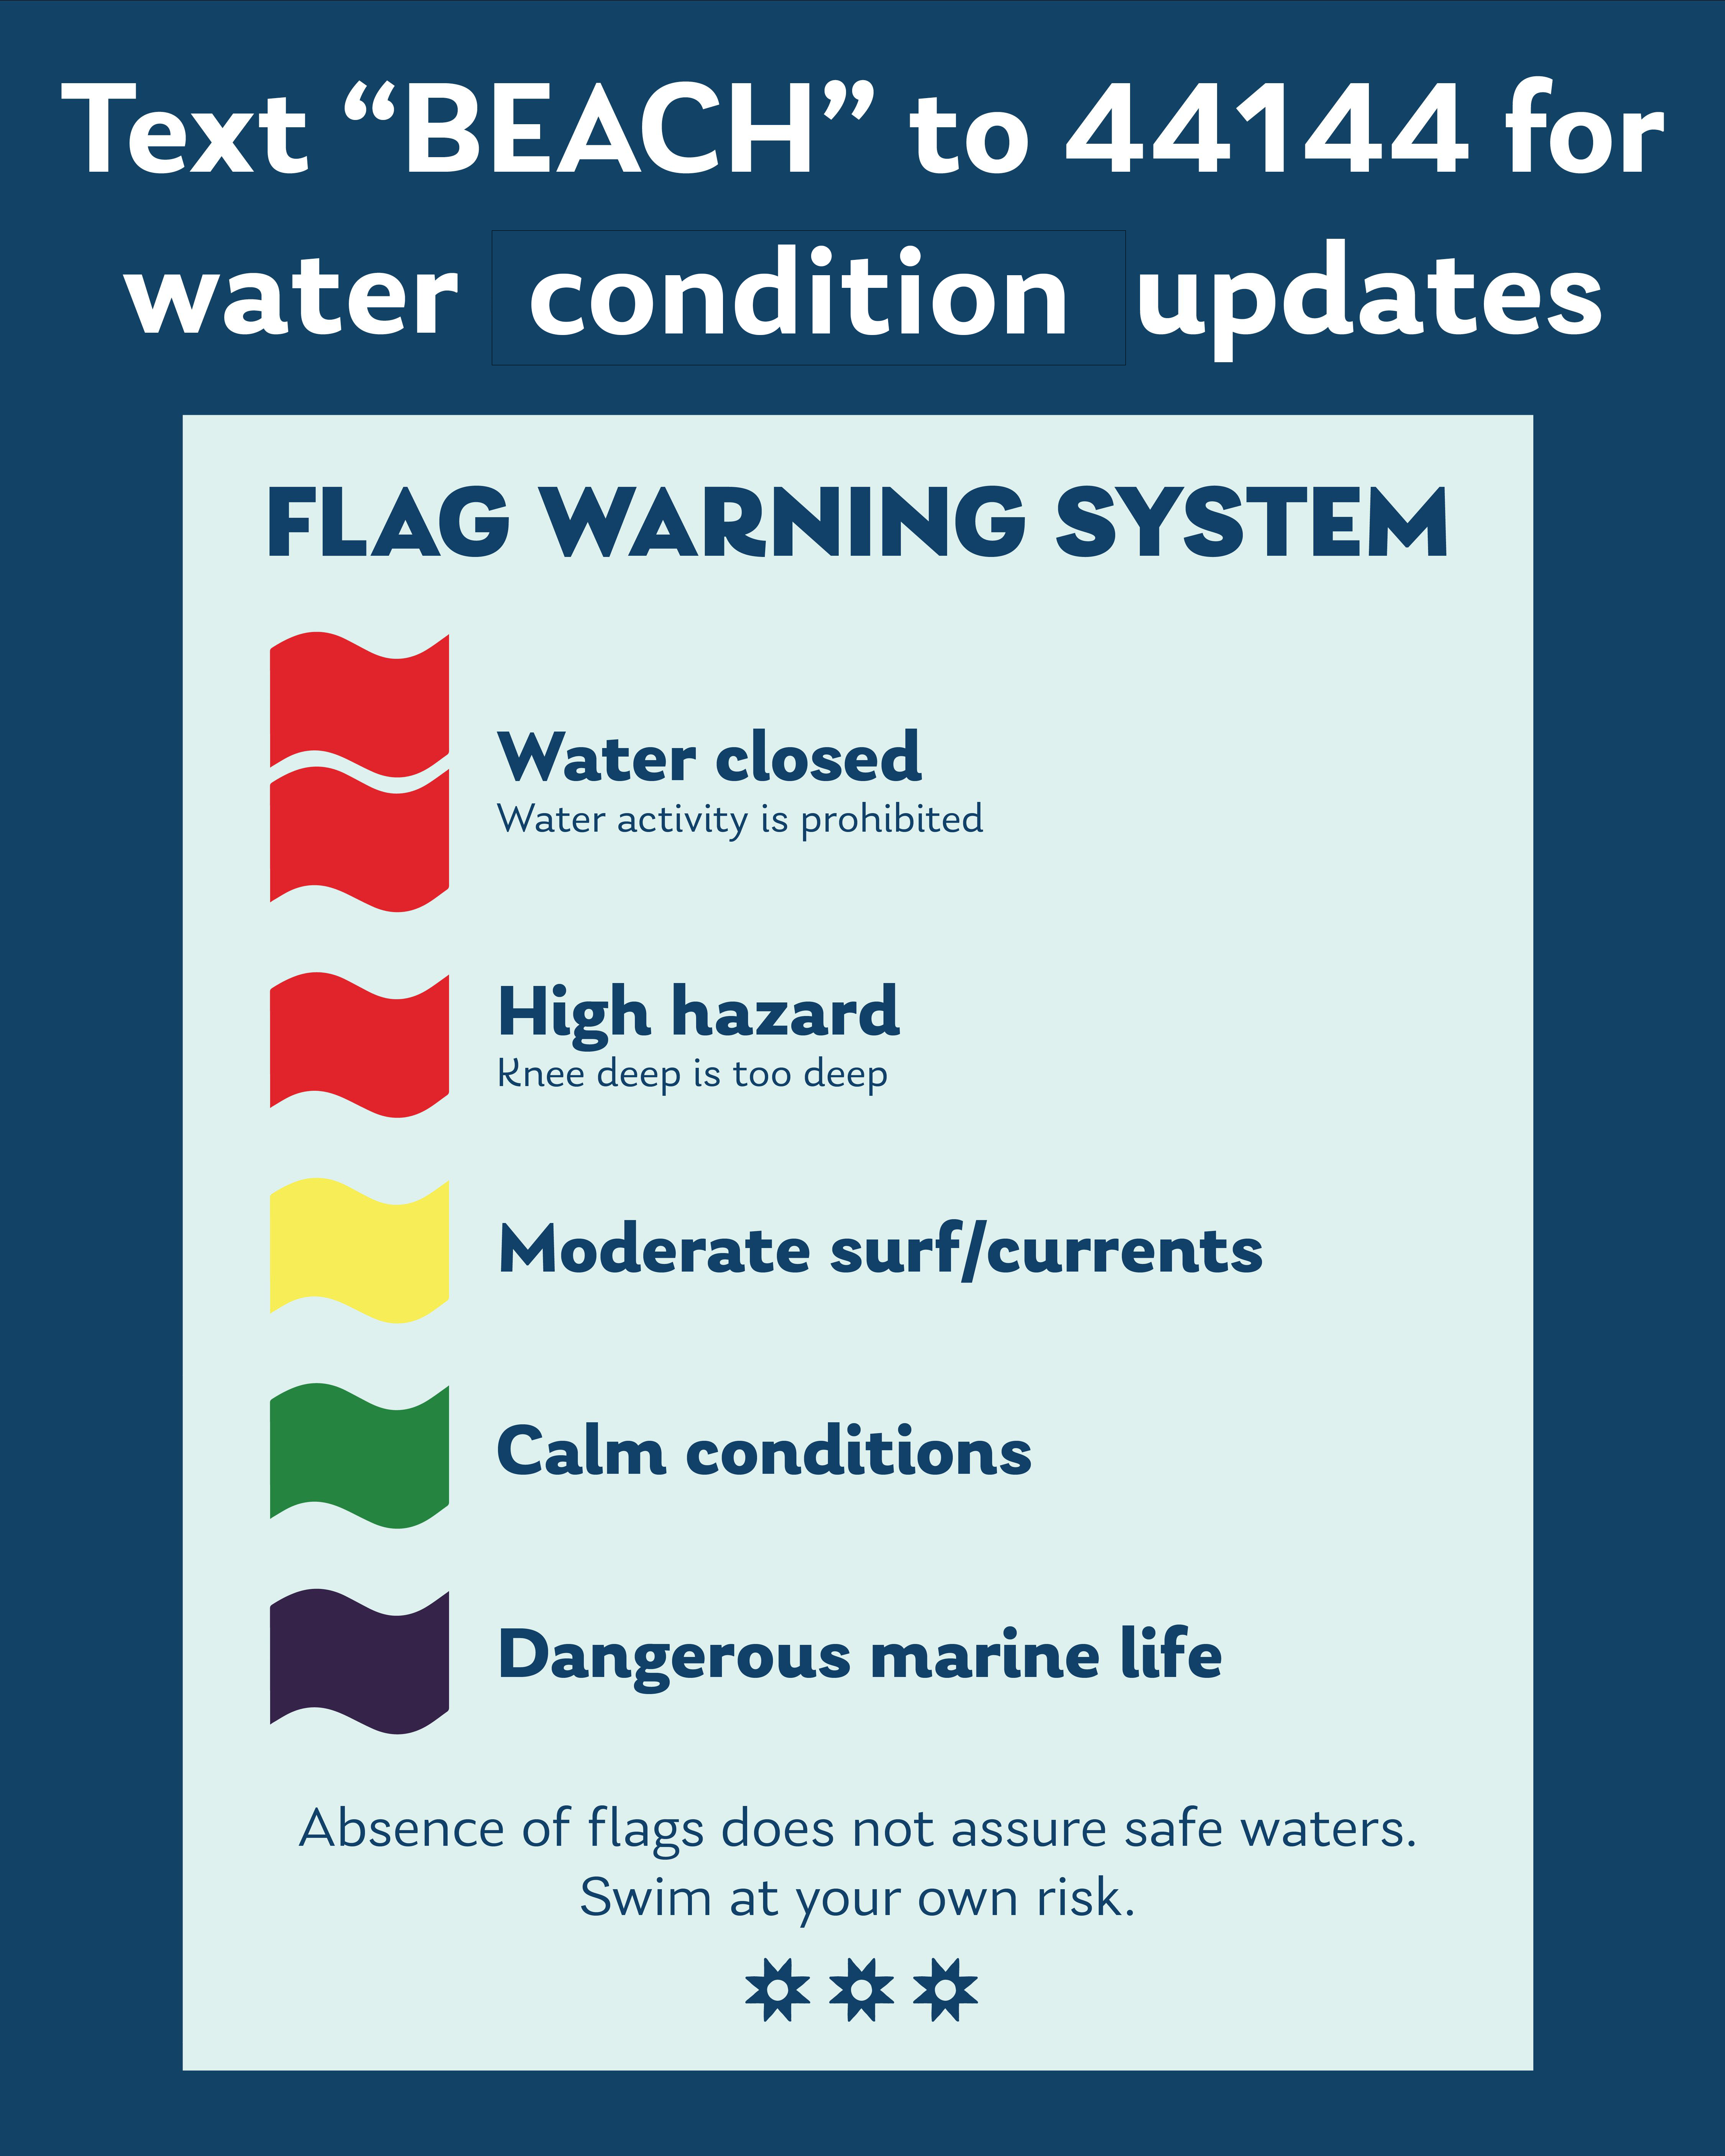 text beach to 44144 for water conditions updates